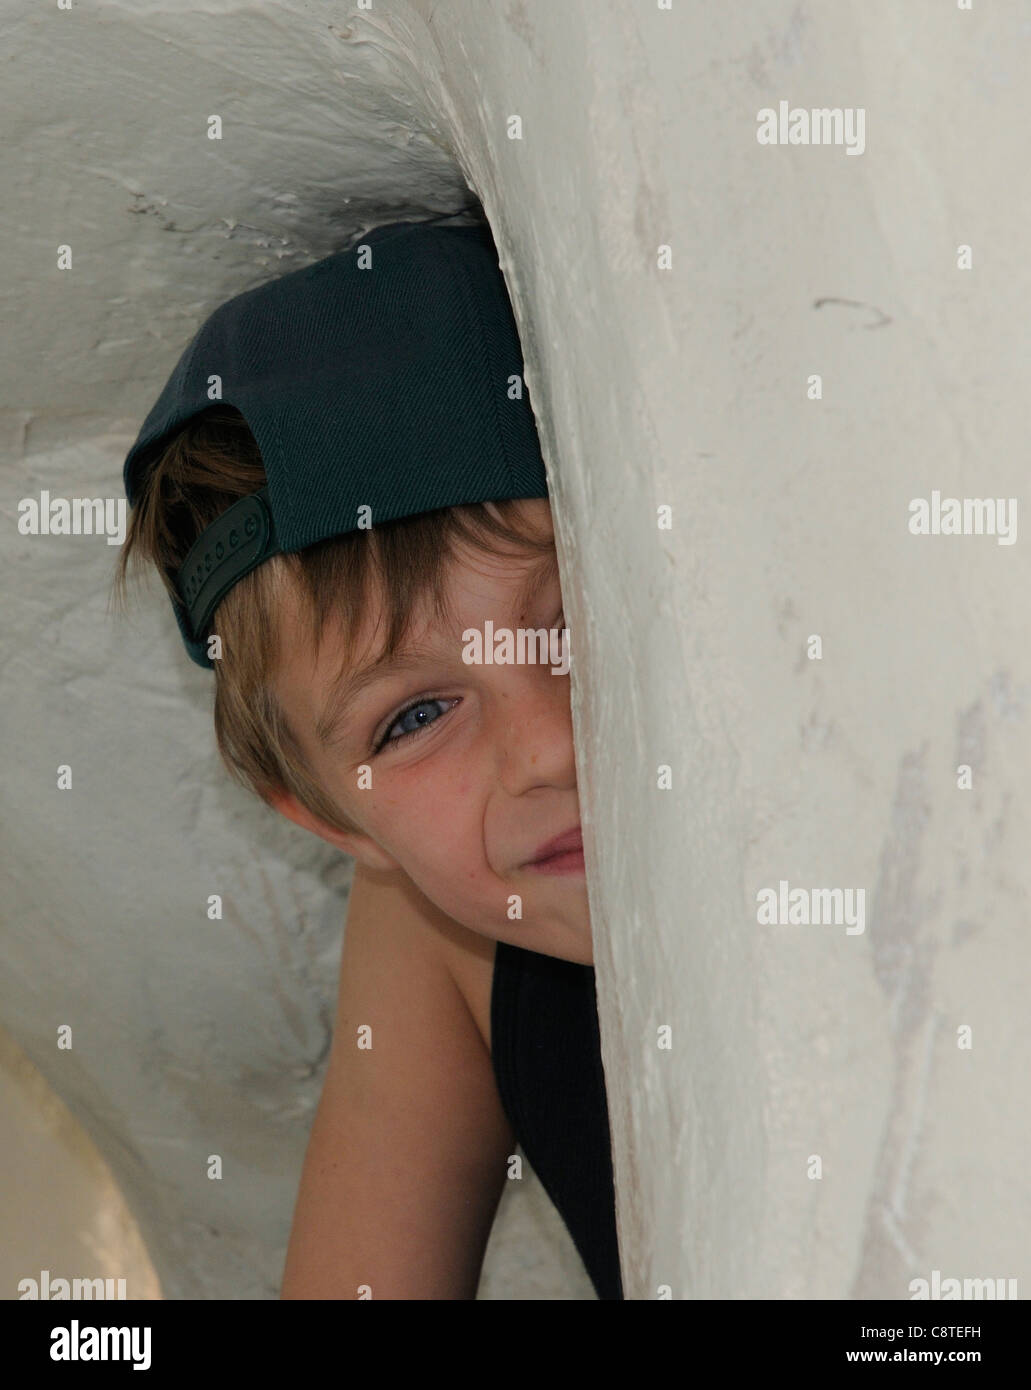 A smiling young boy peeping out from a hiding place Stock Photo